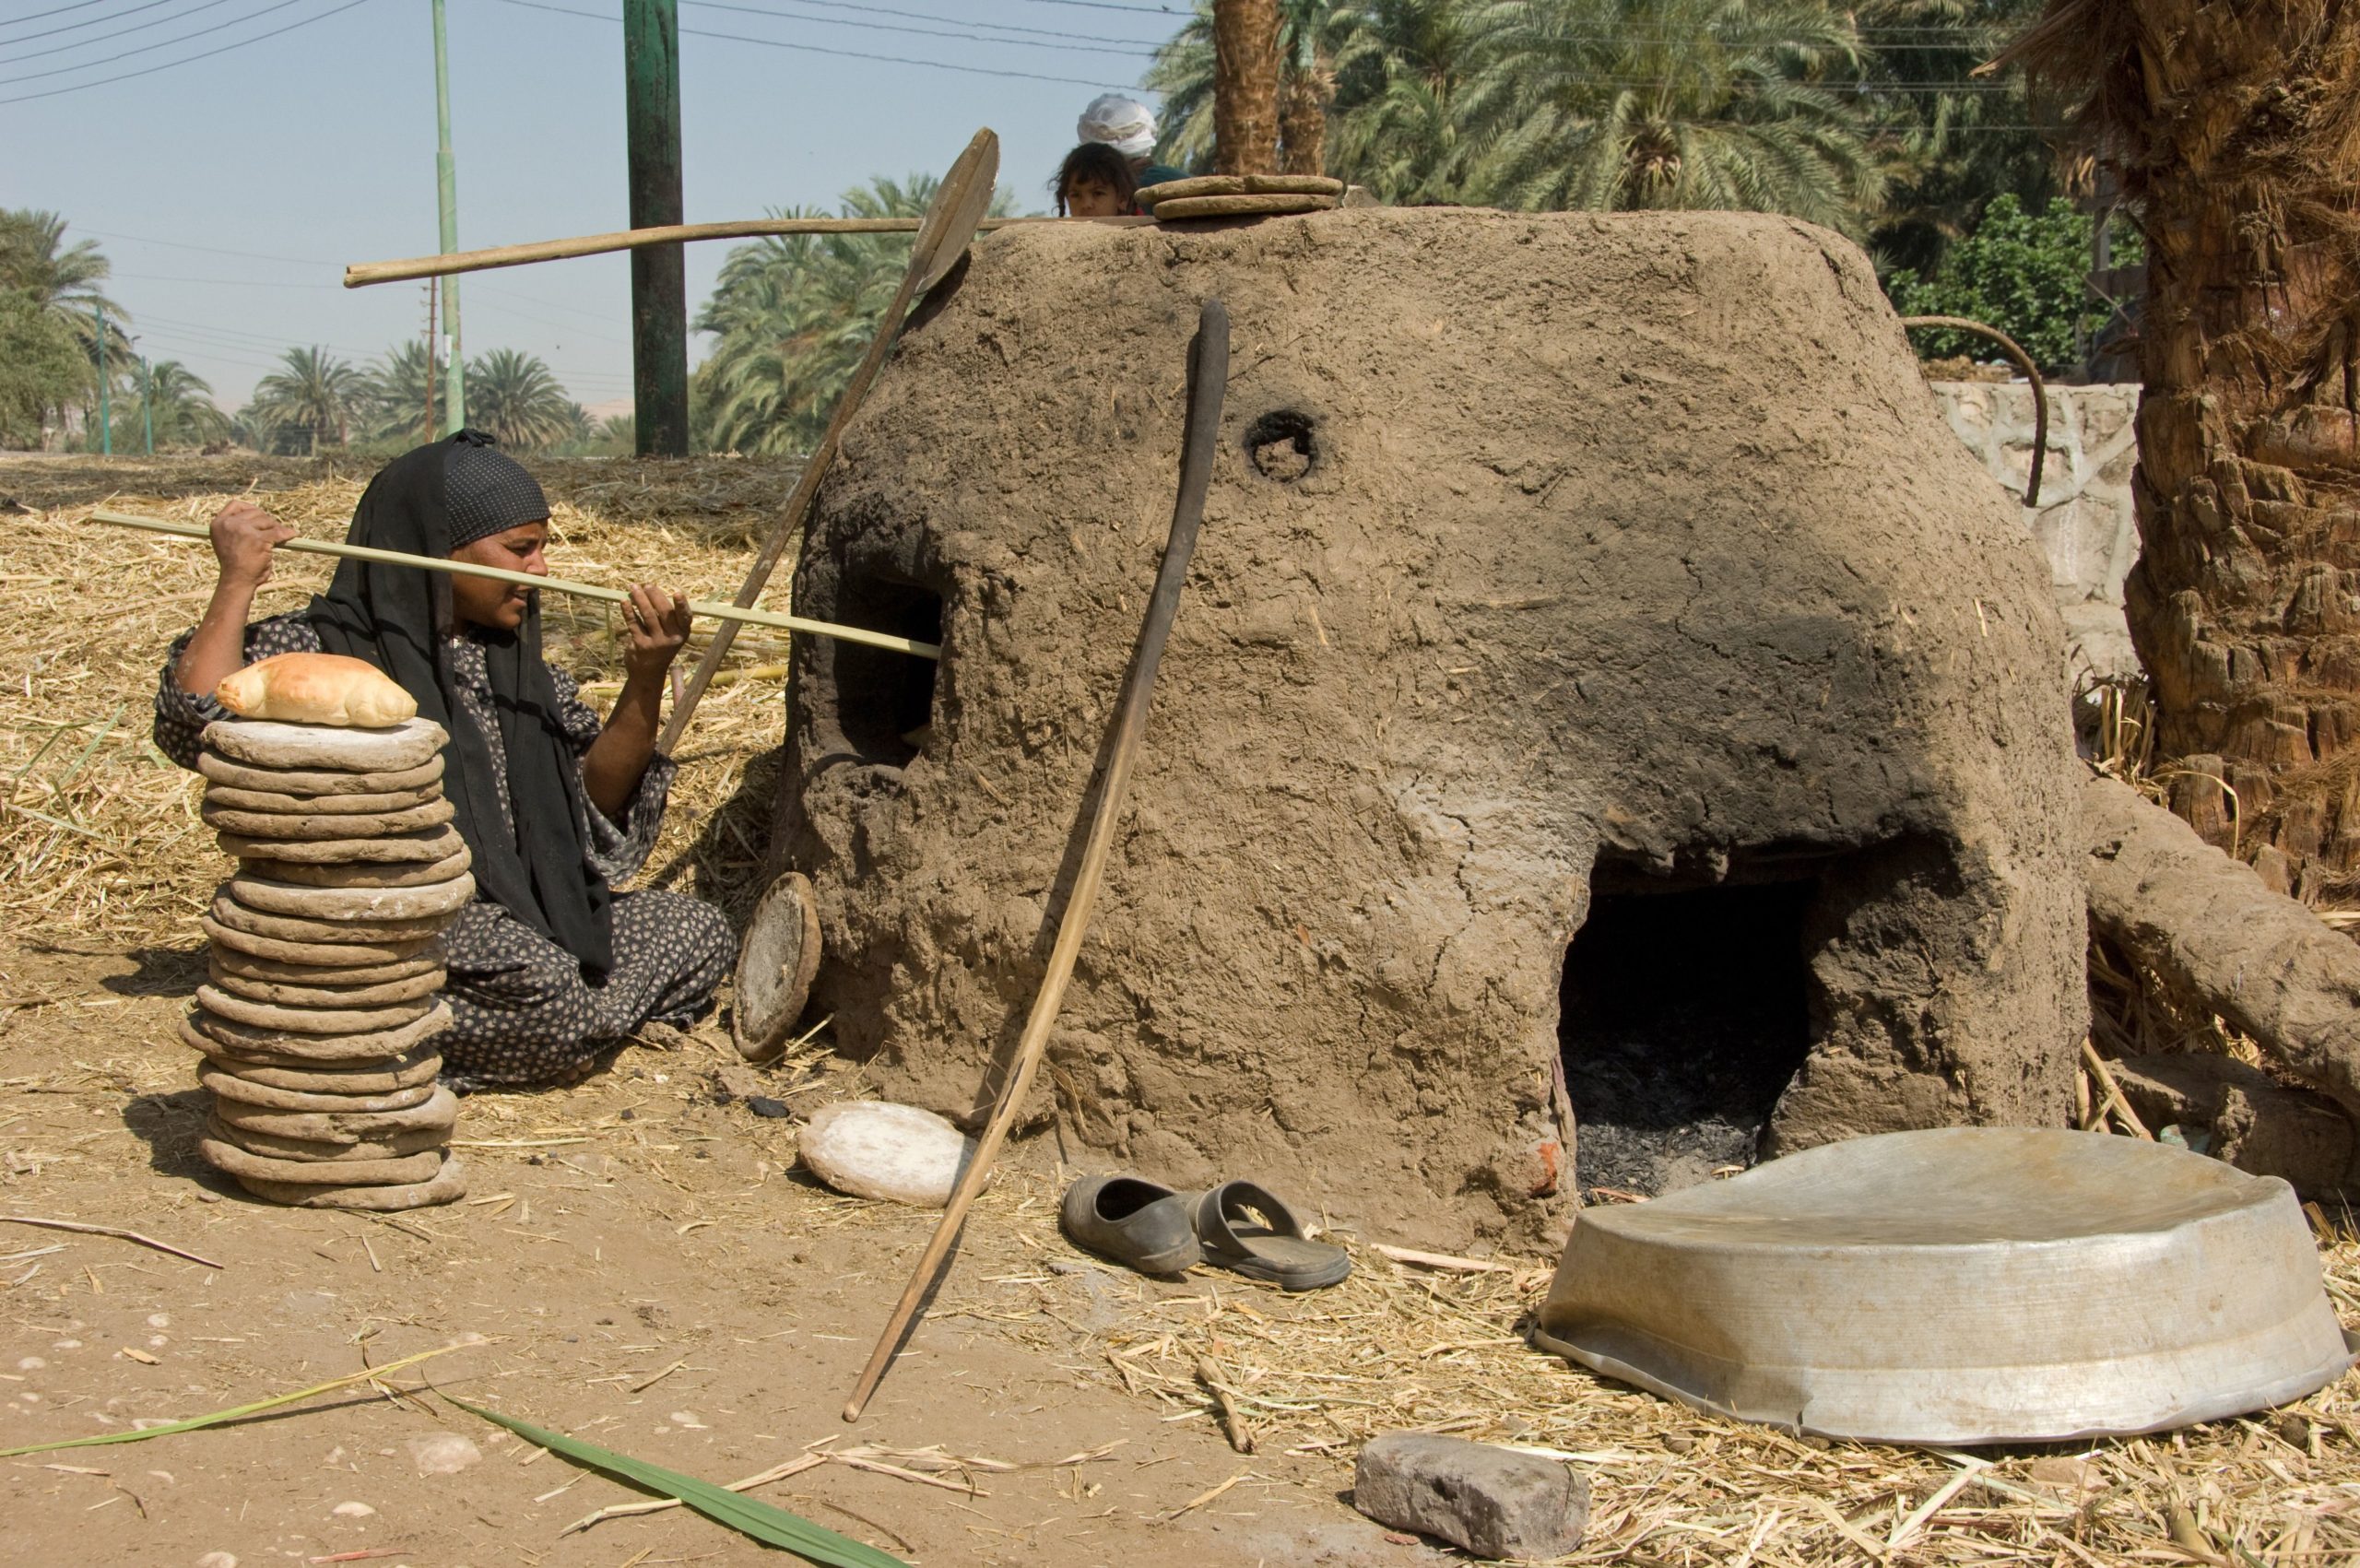 A labourer baking bread in a mud oven in Luxor, Egypt